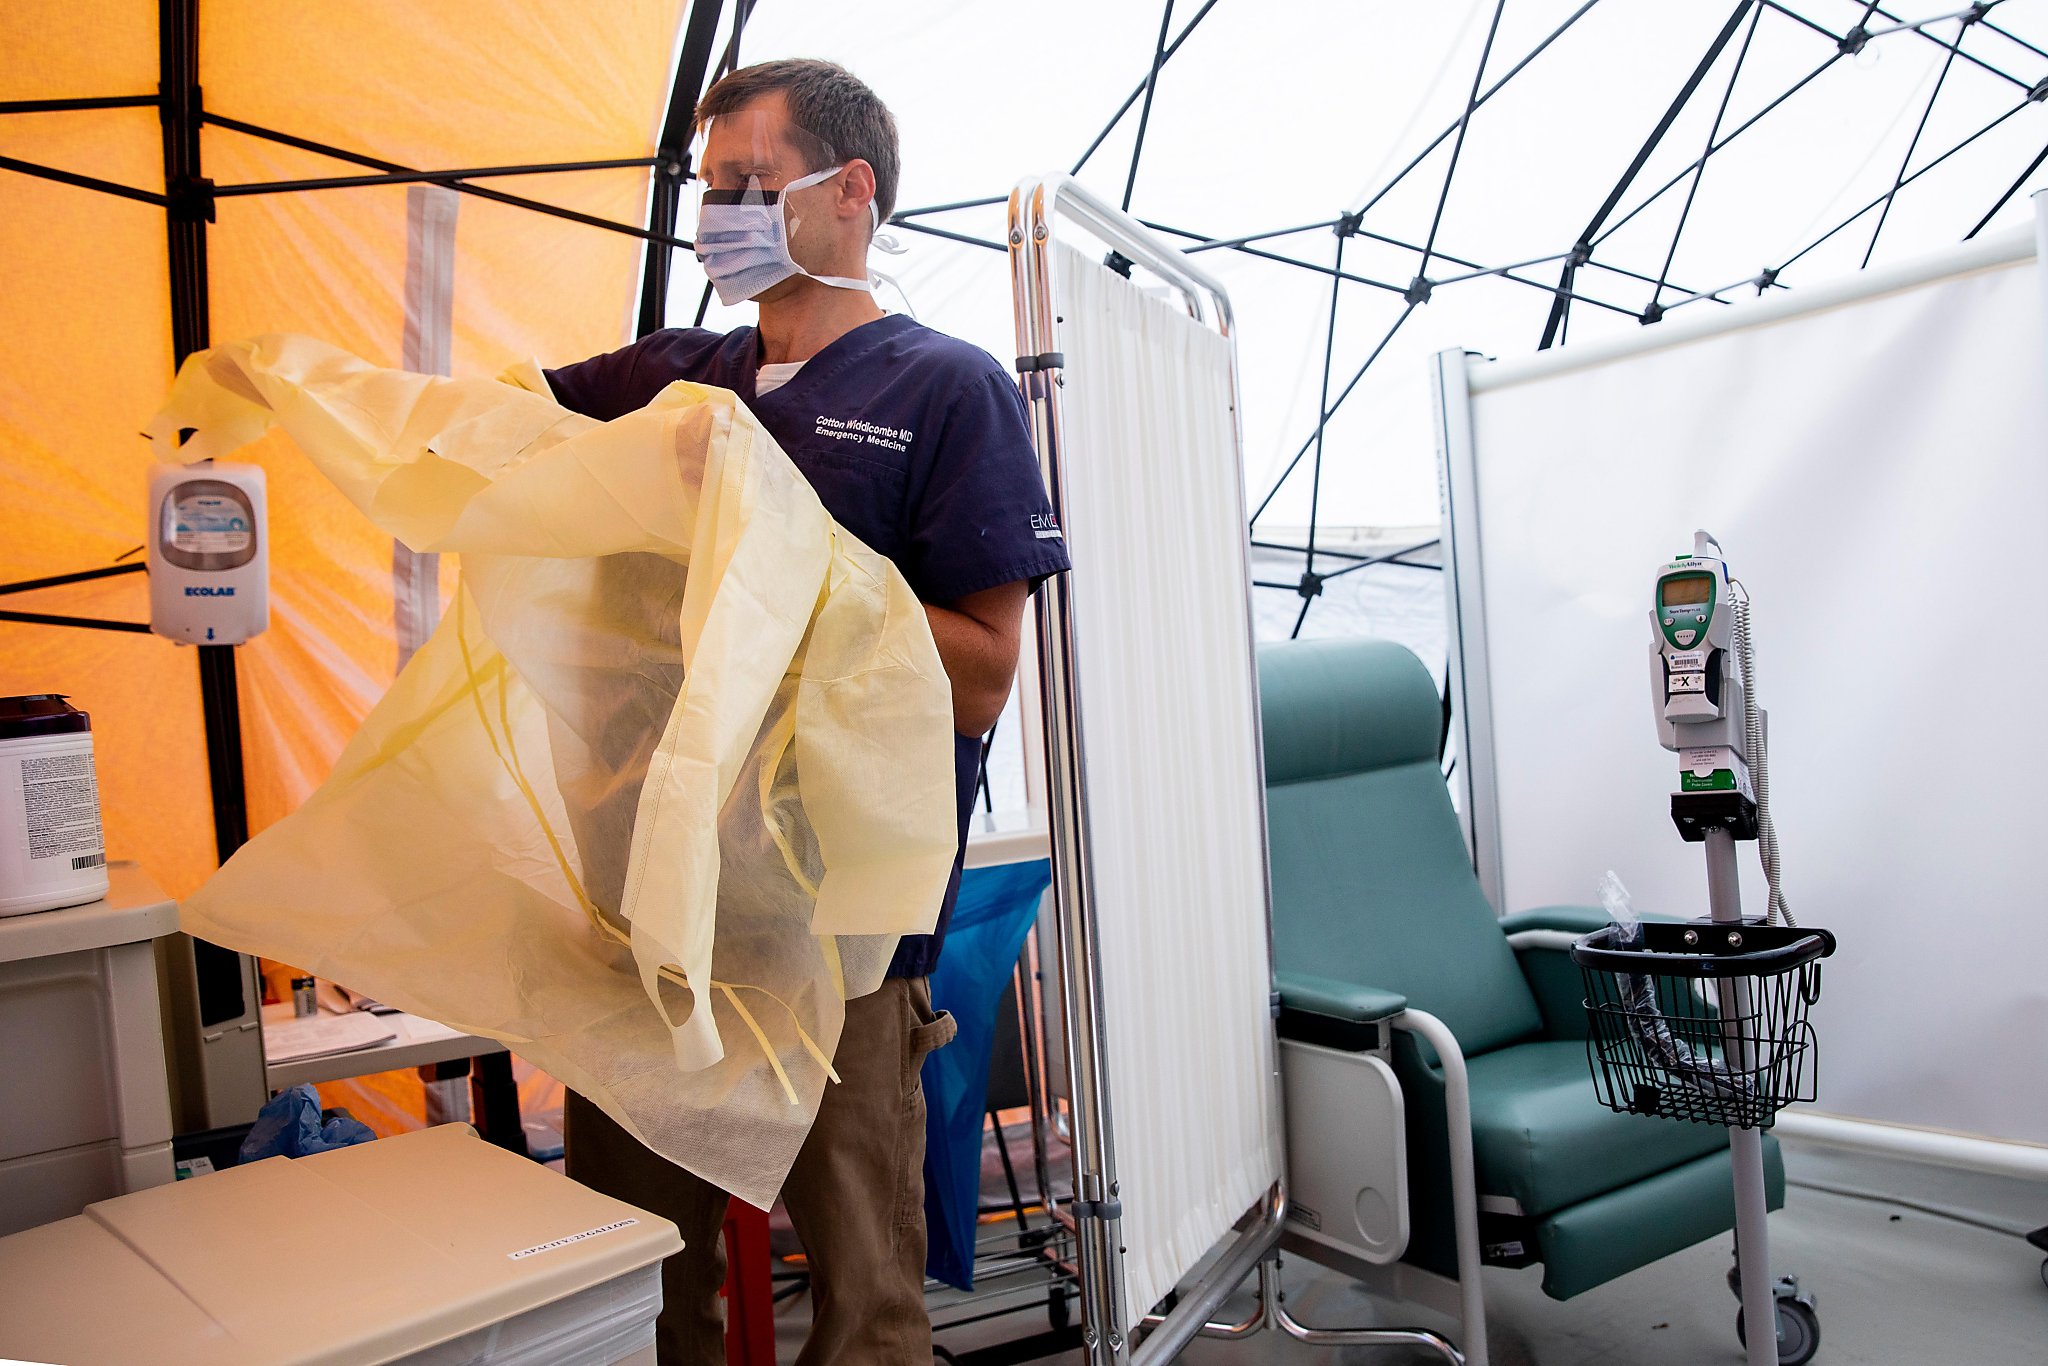 Coronavirus costs Bay Area hospitals millions, crippling those that serve low-income patients